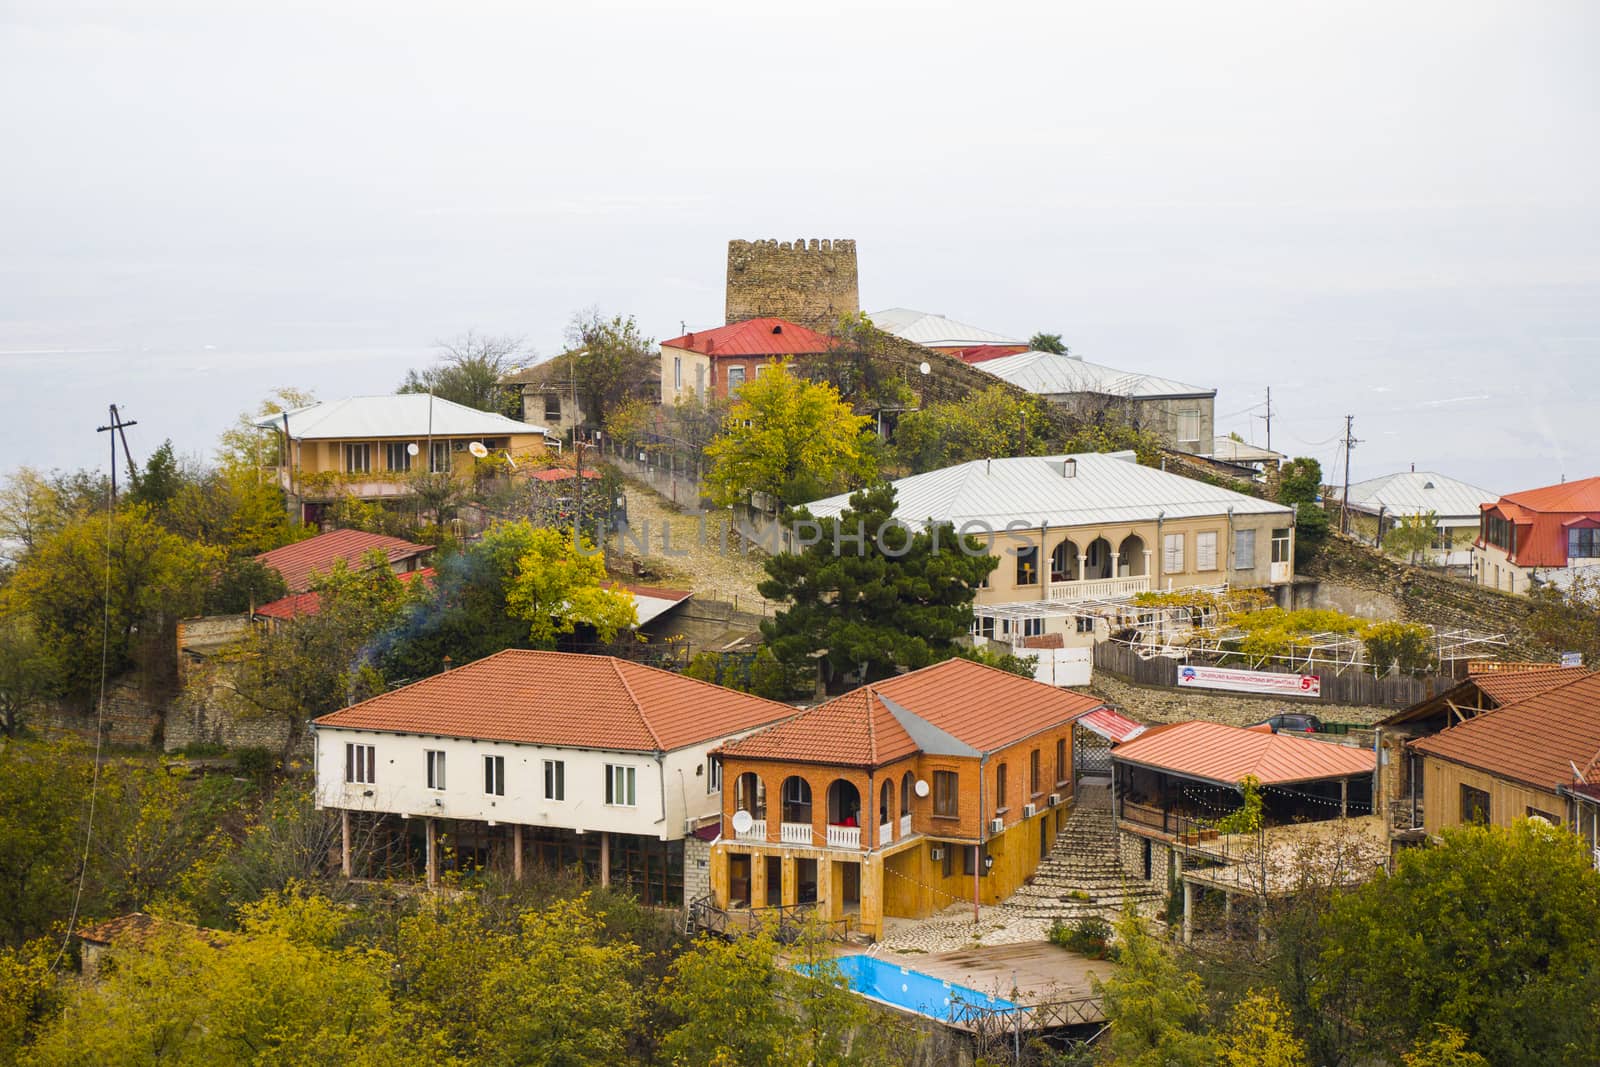 Sighnaghi village landscape and city view in Kakheti, Georgia by Taidundua